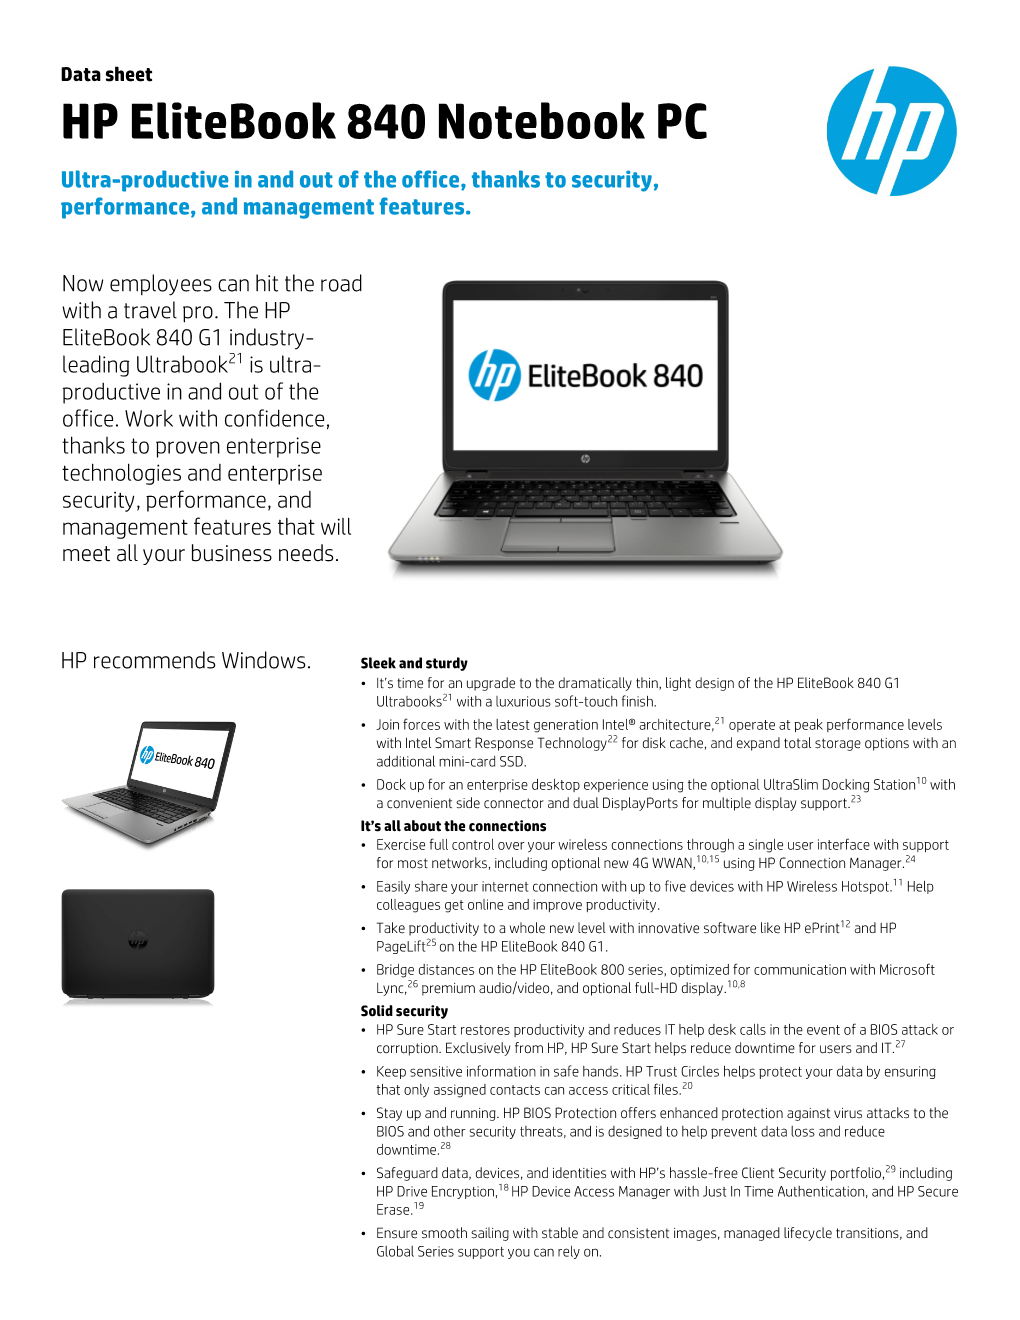 HP Elitebook 840 Notebook PC Ultra-Productive in and out of the Office, Thanks to Security, Performance, and Management Features